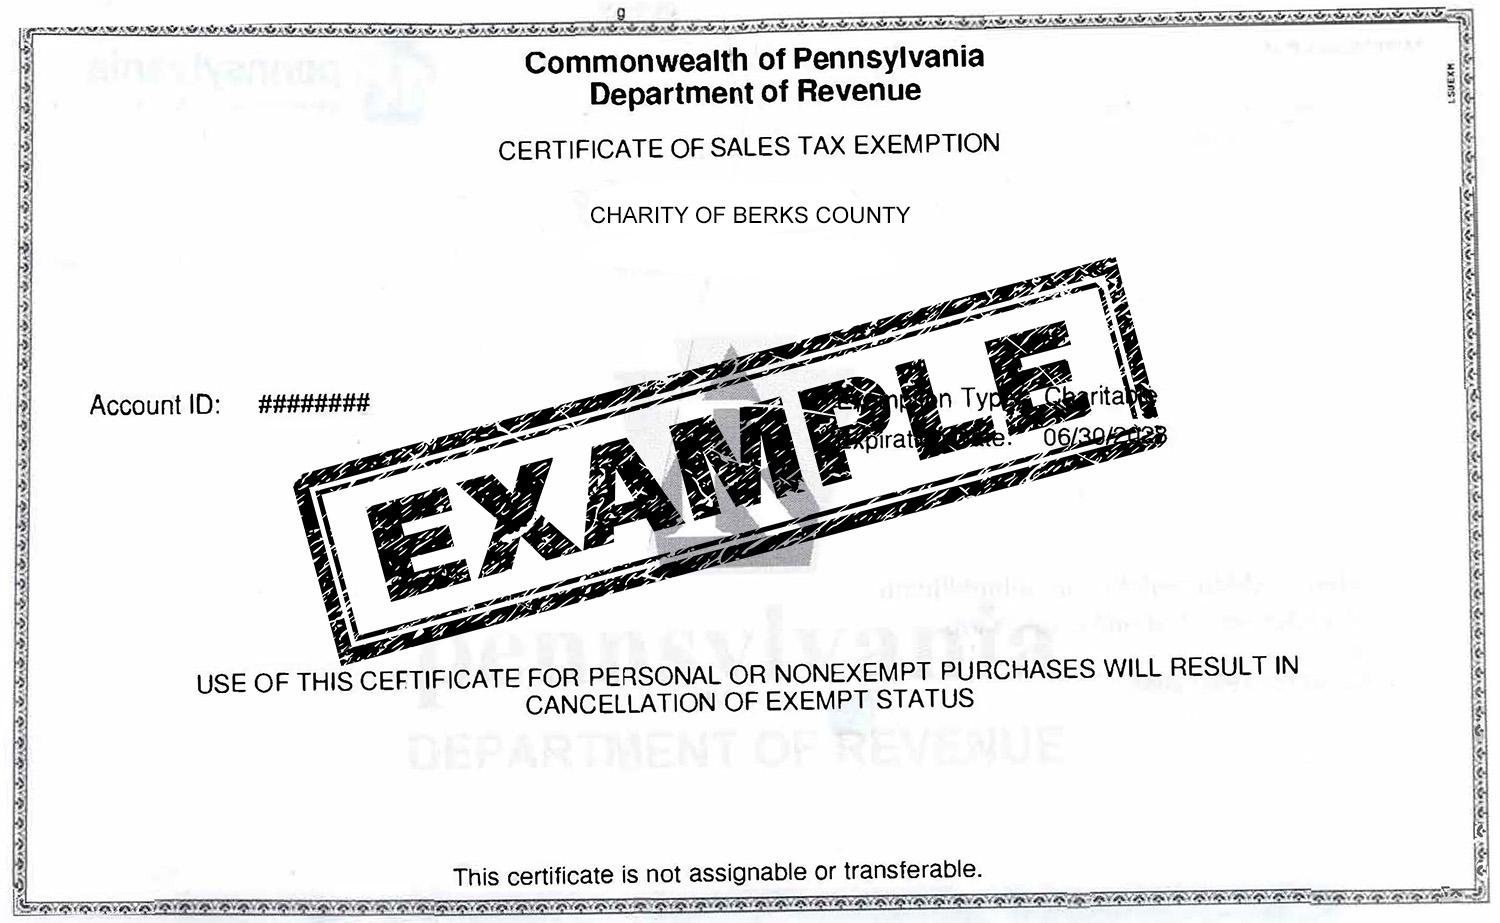 Example of a Certificate of Sales Tax Exemption